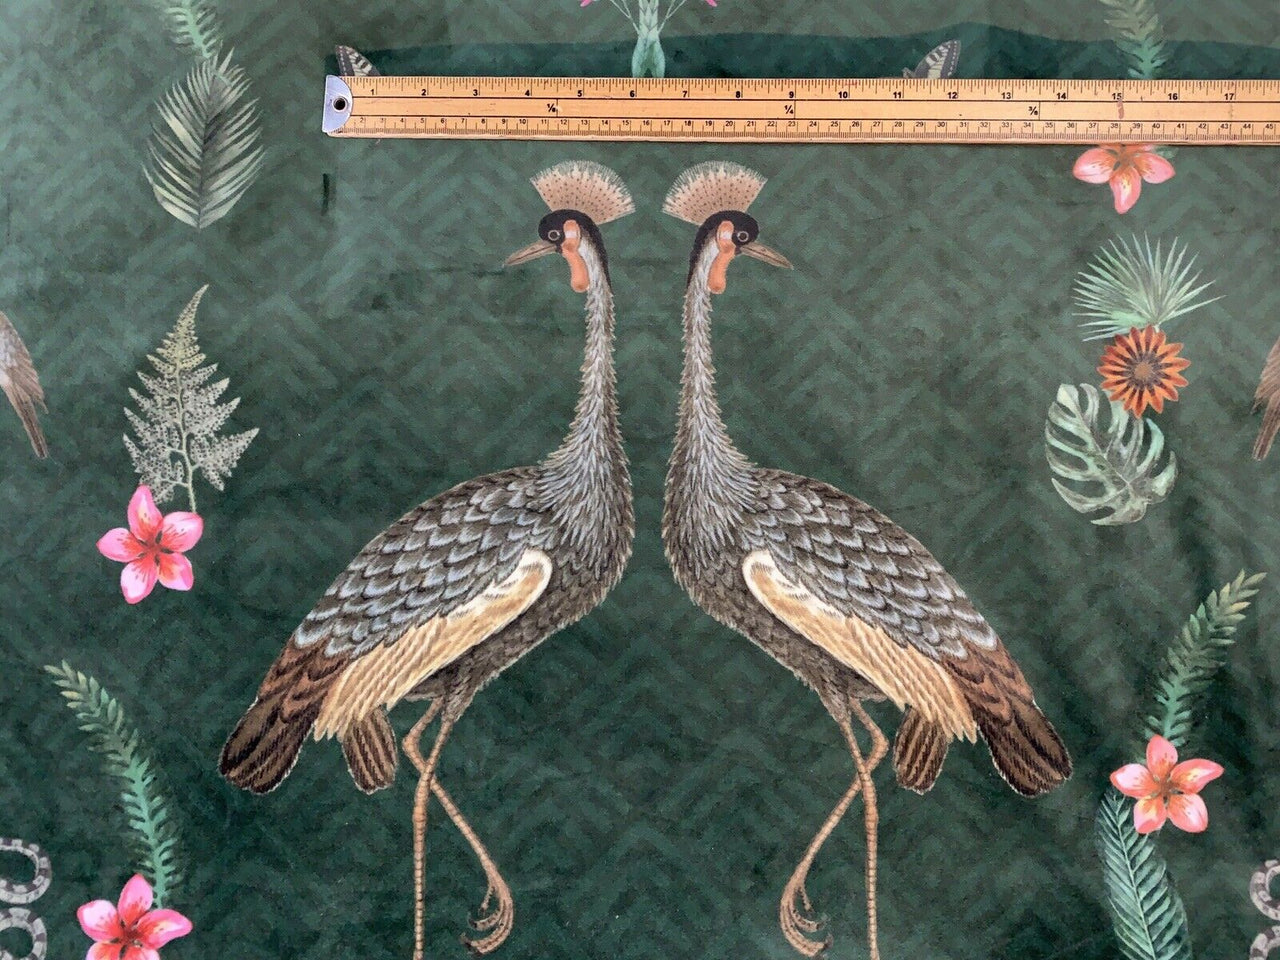 Upholstery Velvet Fabric By Meter Cranes Birds Floral Sewing Material Green Botanical Textile